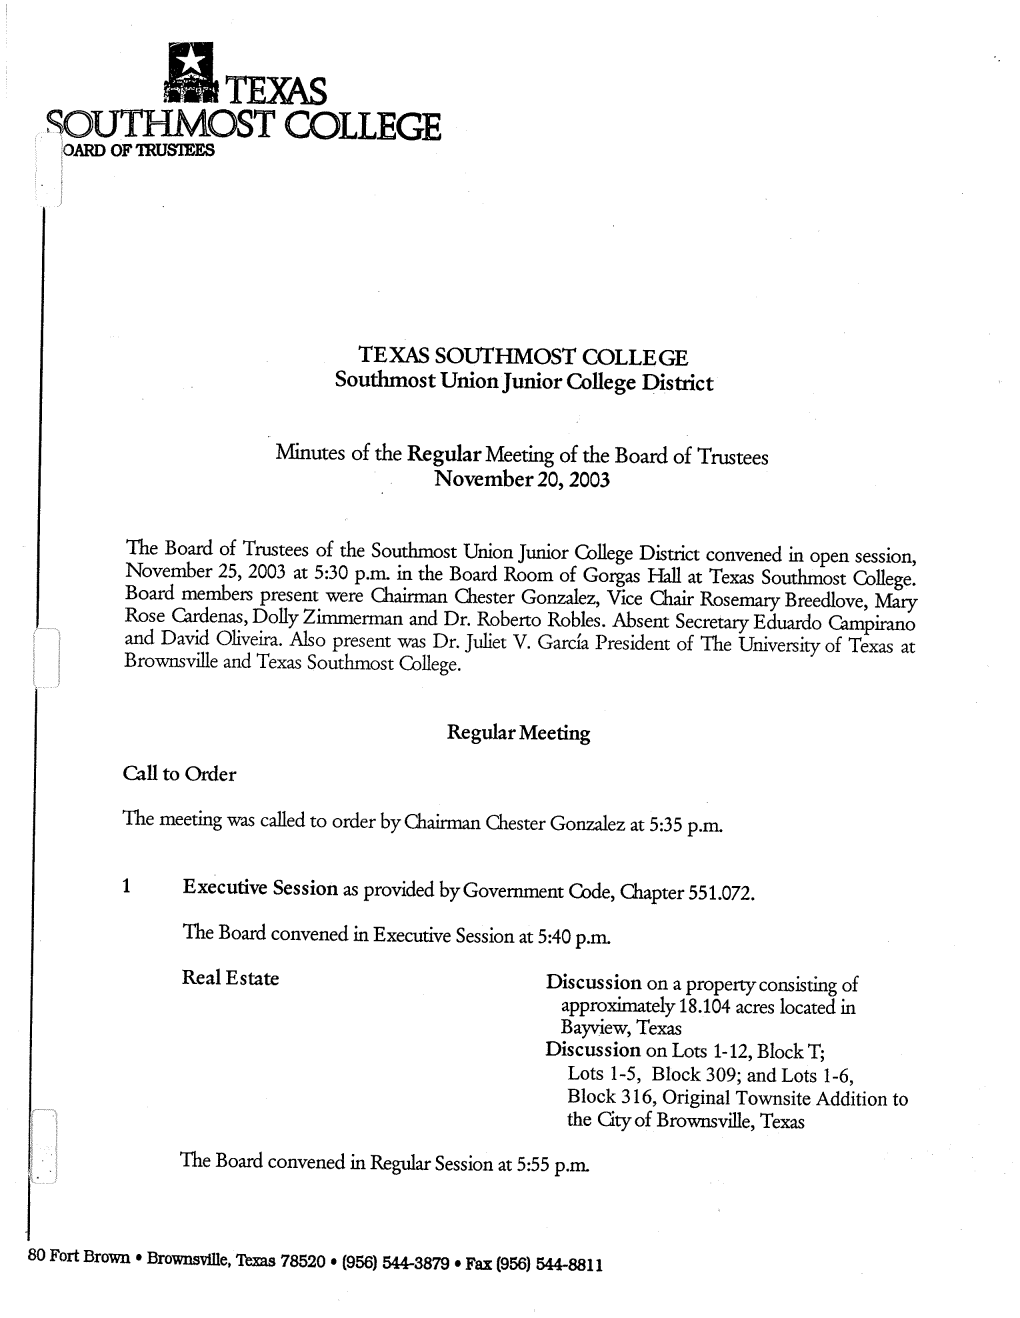 Minutes of the Regular Meeting of the Board of Trustees November 20,2003